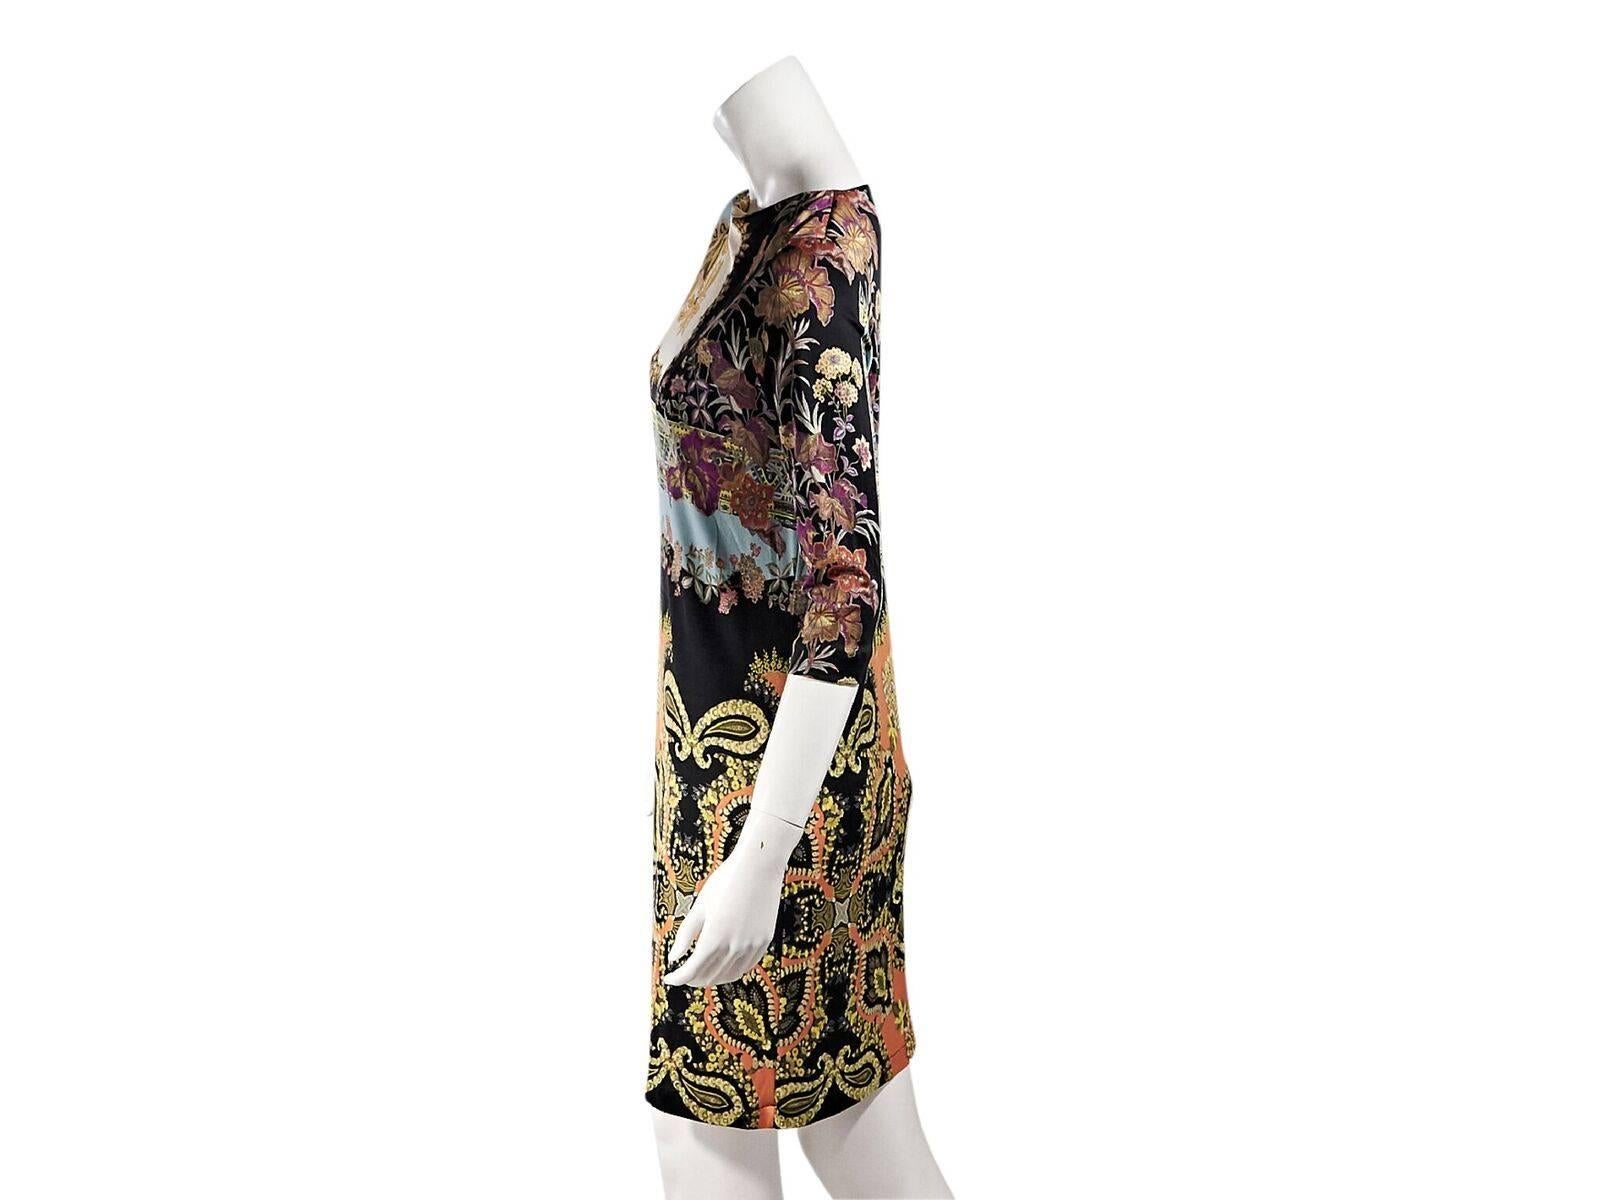 Product details:  Multicolor printed silk shift dress by Etro.  Wide jewelneck.  Elbow-length sleeves.  Pullover style.  EU size 40.  36